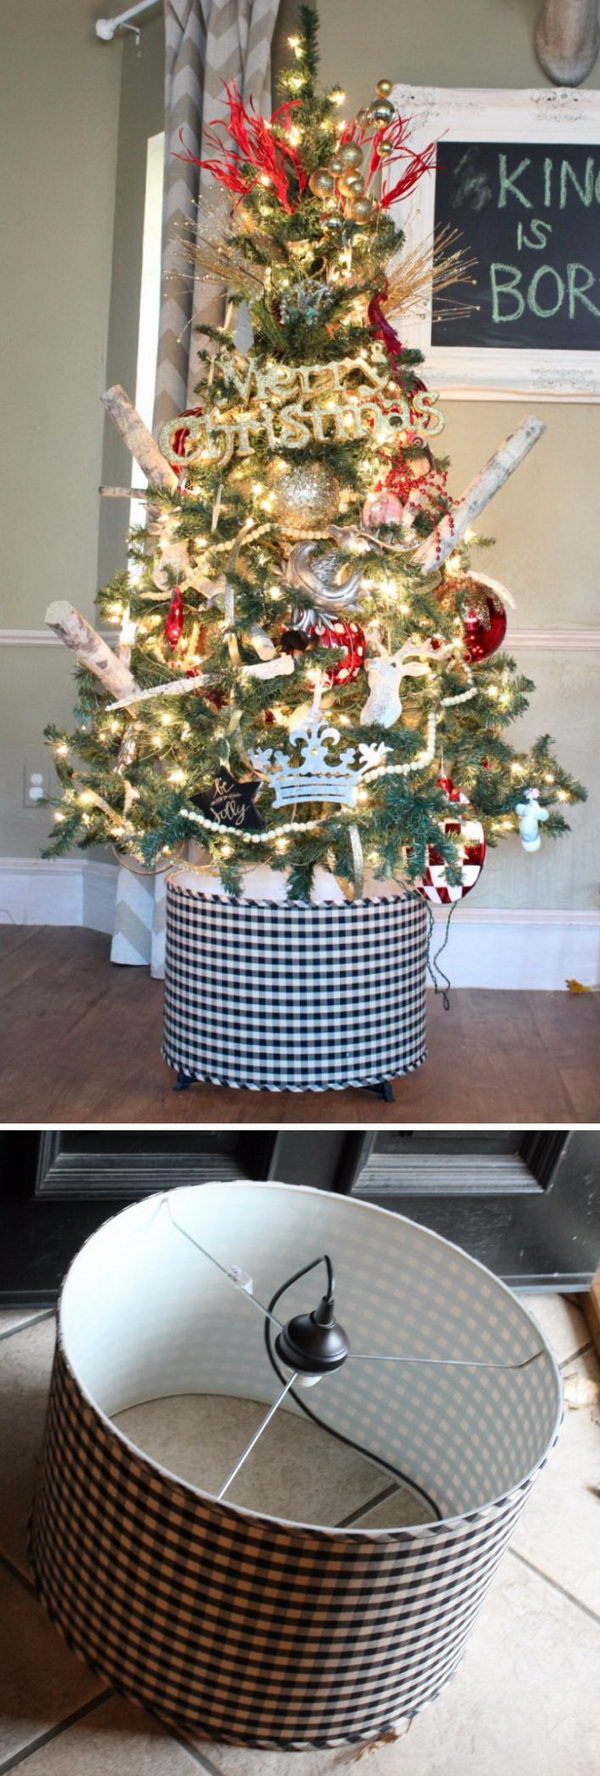 Black And White Gingham Drum Light Fixture Christmas Tree Stand. 